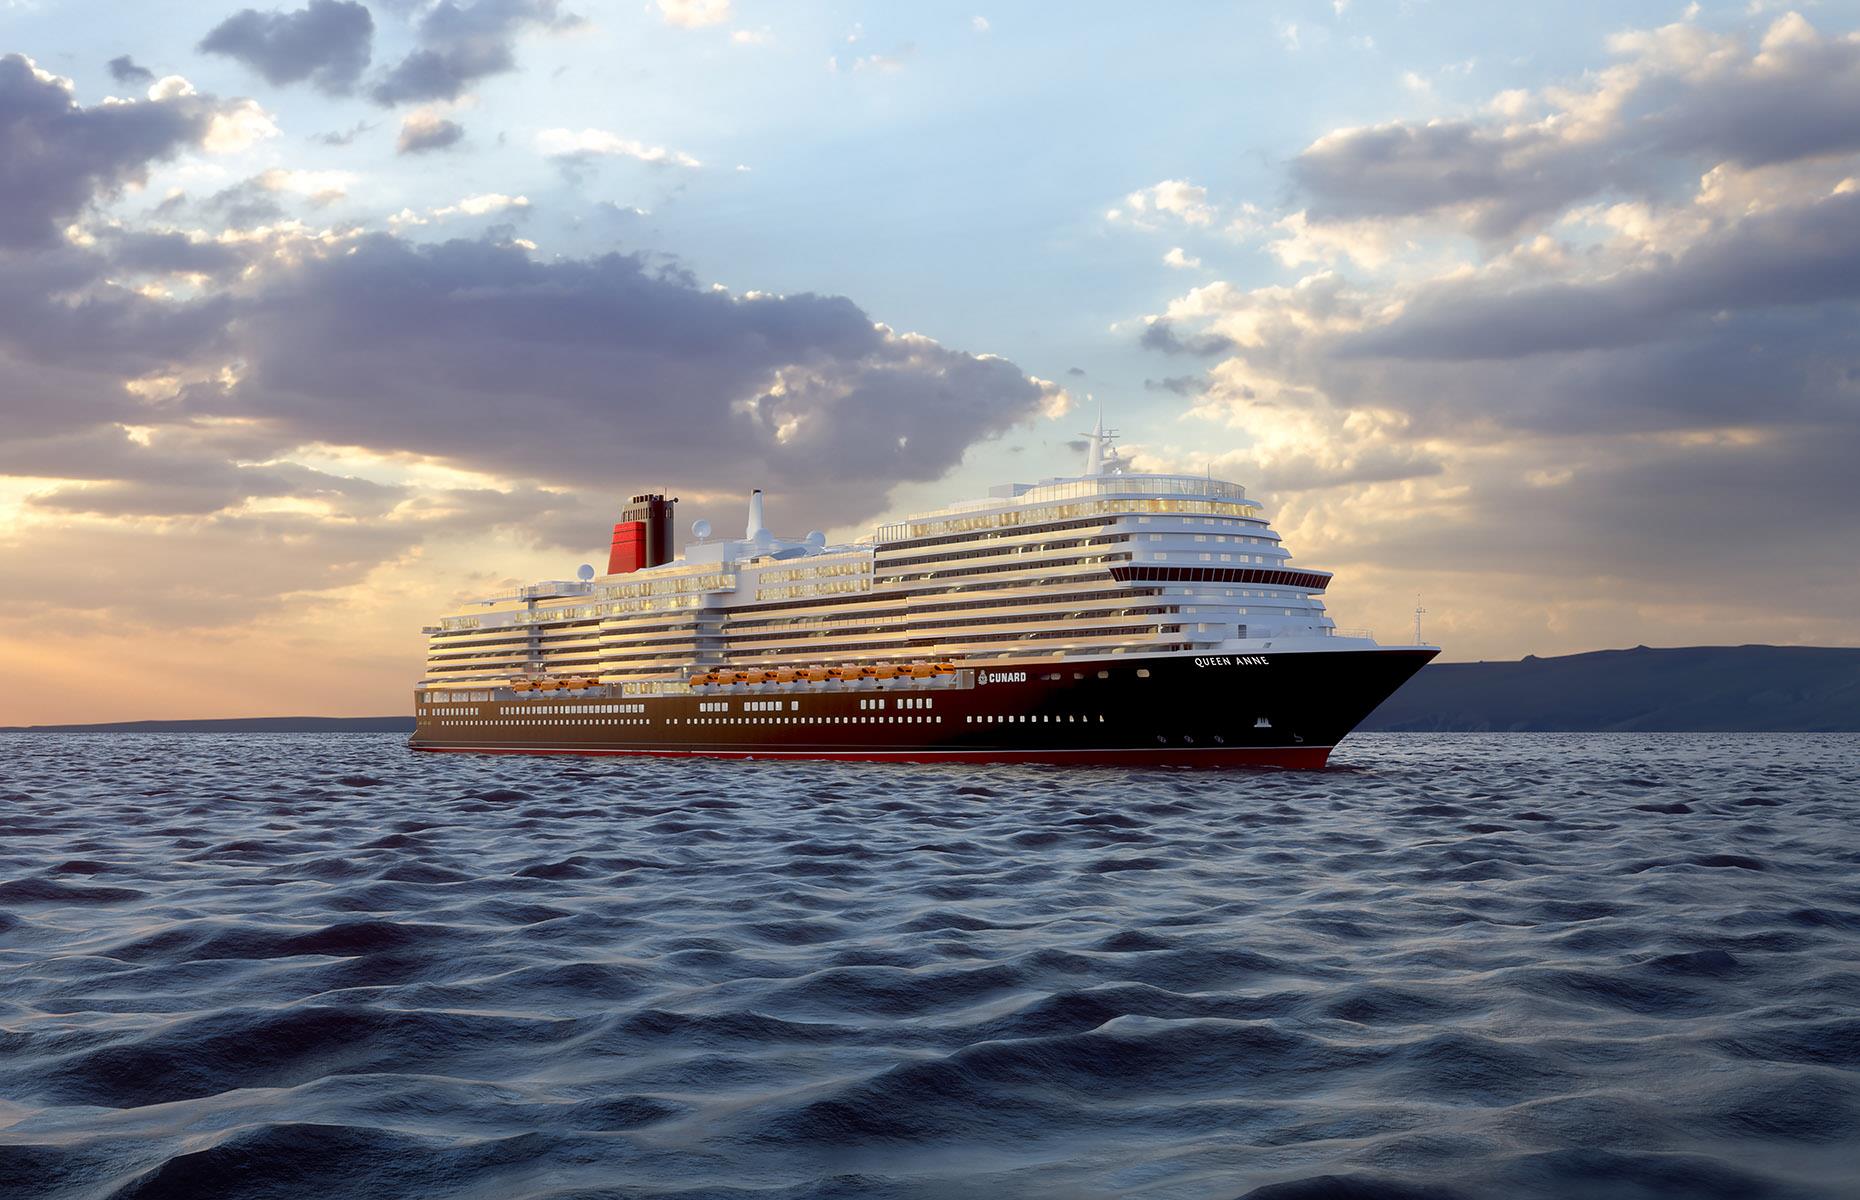 <p>Launching in May 2024, Queen Anne is the newest cruise liner in the Cunard fleet and the 249th ship to sail under its historic flag. On board, life centres around the three-storey grand lobby, a show-stopping space celebrating 182 years of Cunard. For the ship's 2,996 guests, entertainment can be found in the casino, library, art gallery and 825-seat theatre, while the Queens Room hosts everything from afternoon tea and classical recitals to ballroom dancing. As if that's not enough, there's also a spa, wellness centre and The Pavilion – a space with a retractable glass dome roof where passengers can enjoy open-air theatre, cinema screenings and live music.</p>